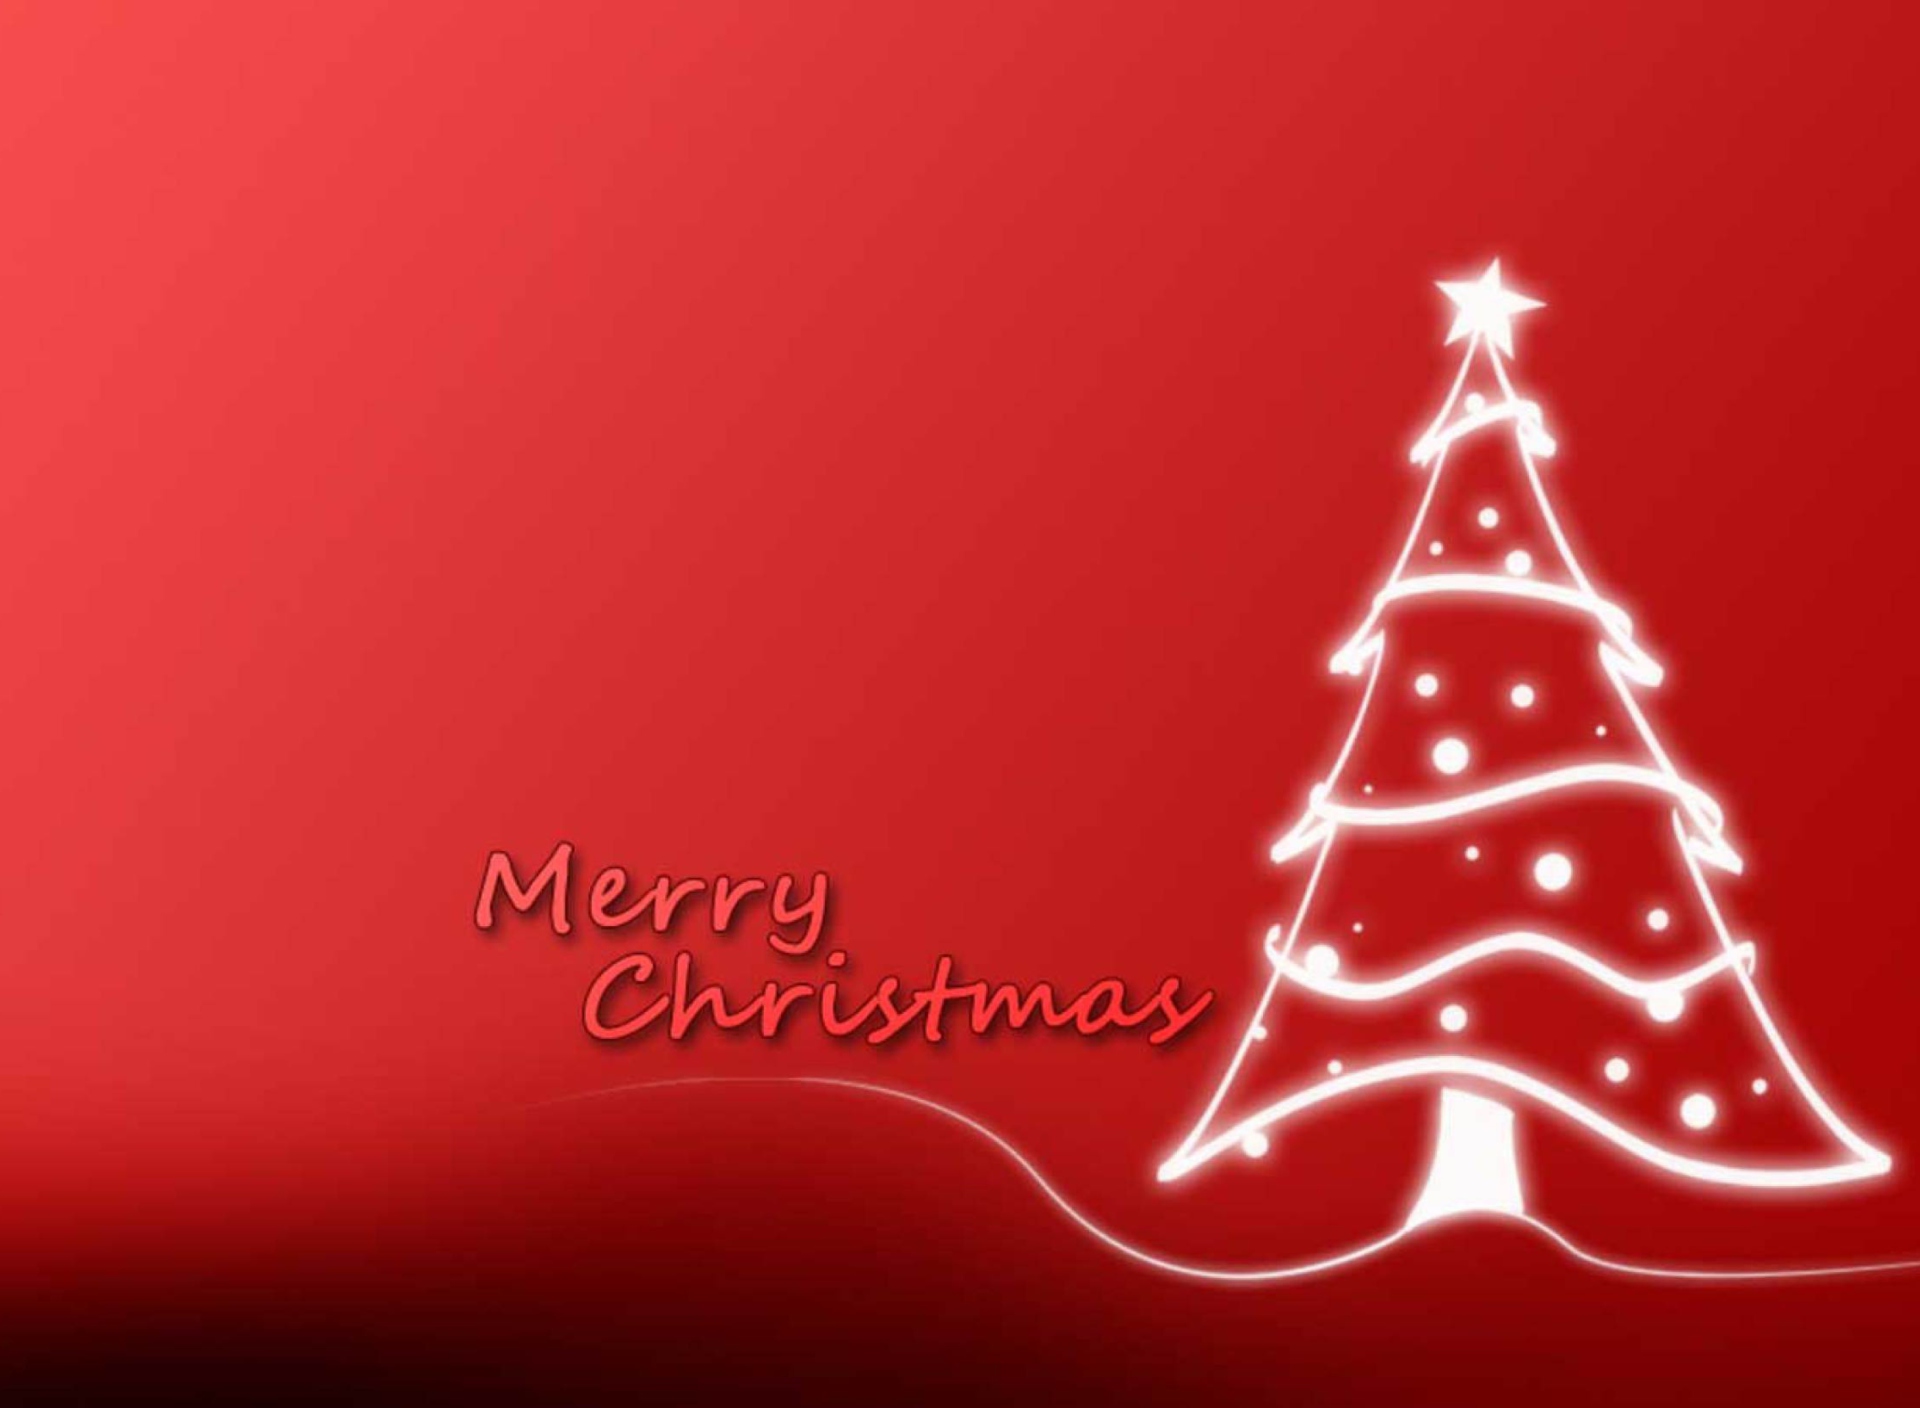 Das Christmas Red And White Tree Wallpaper 1920x1408